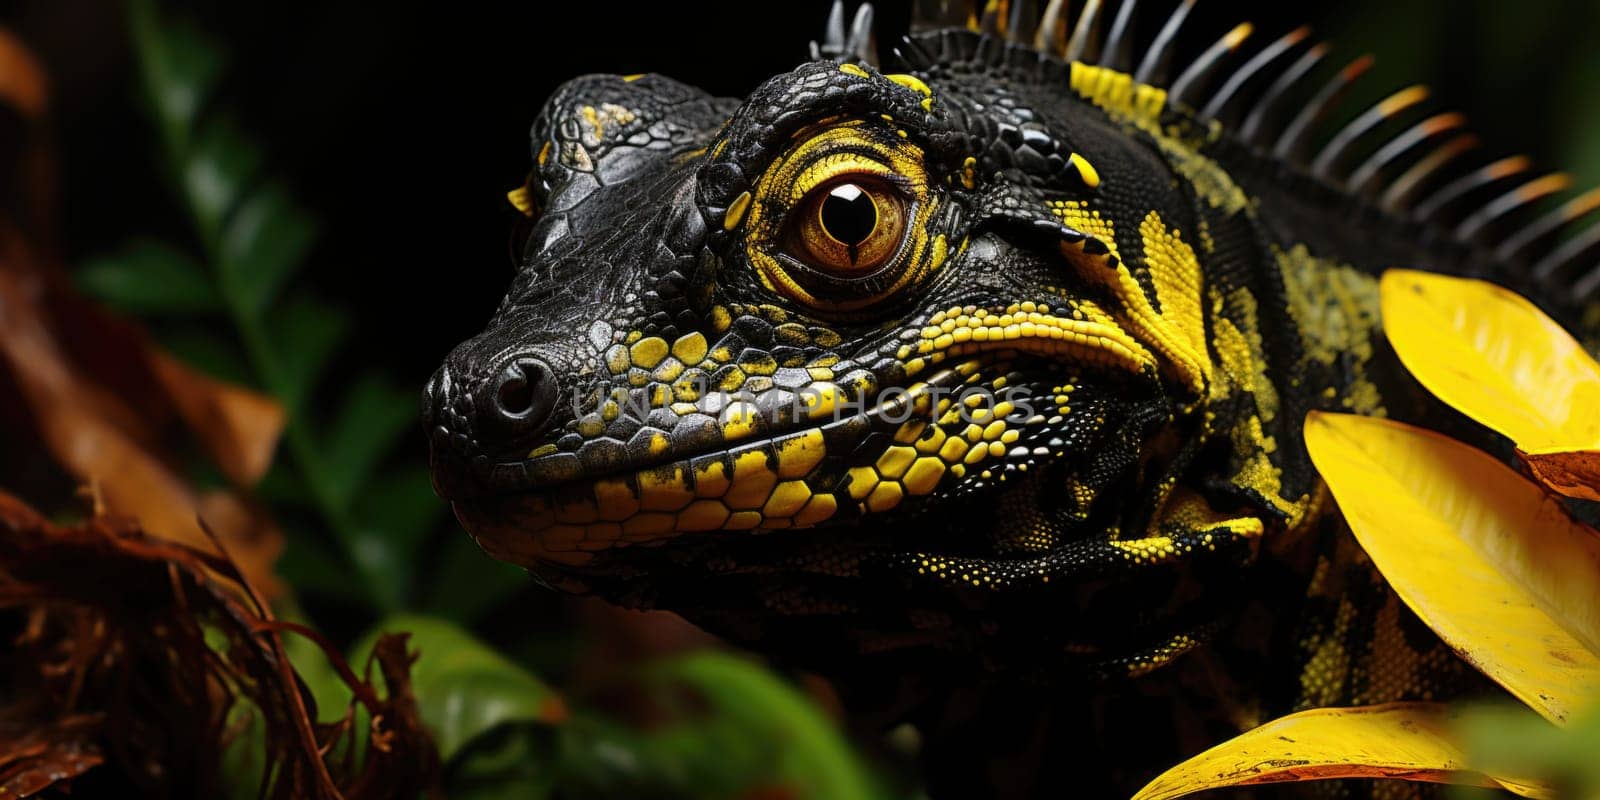 A yellow and black lizard